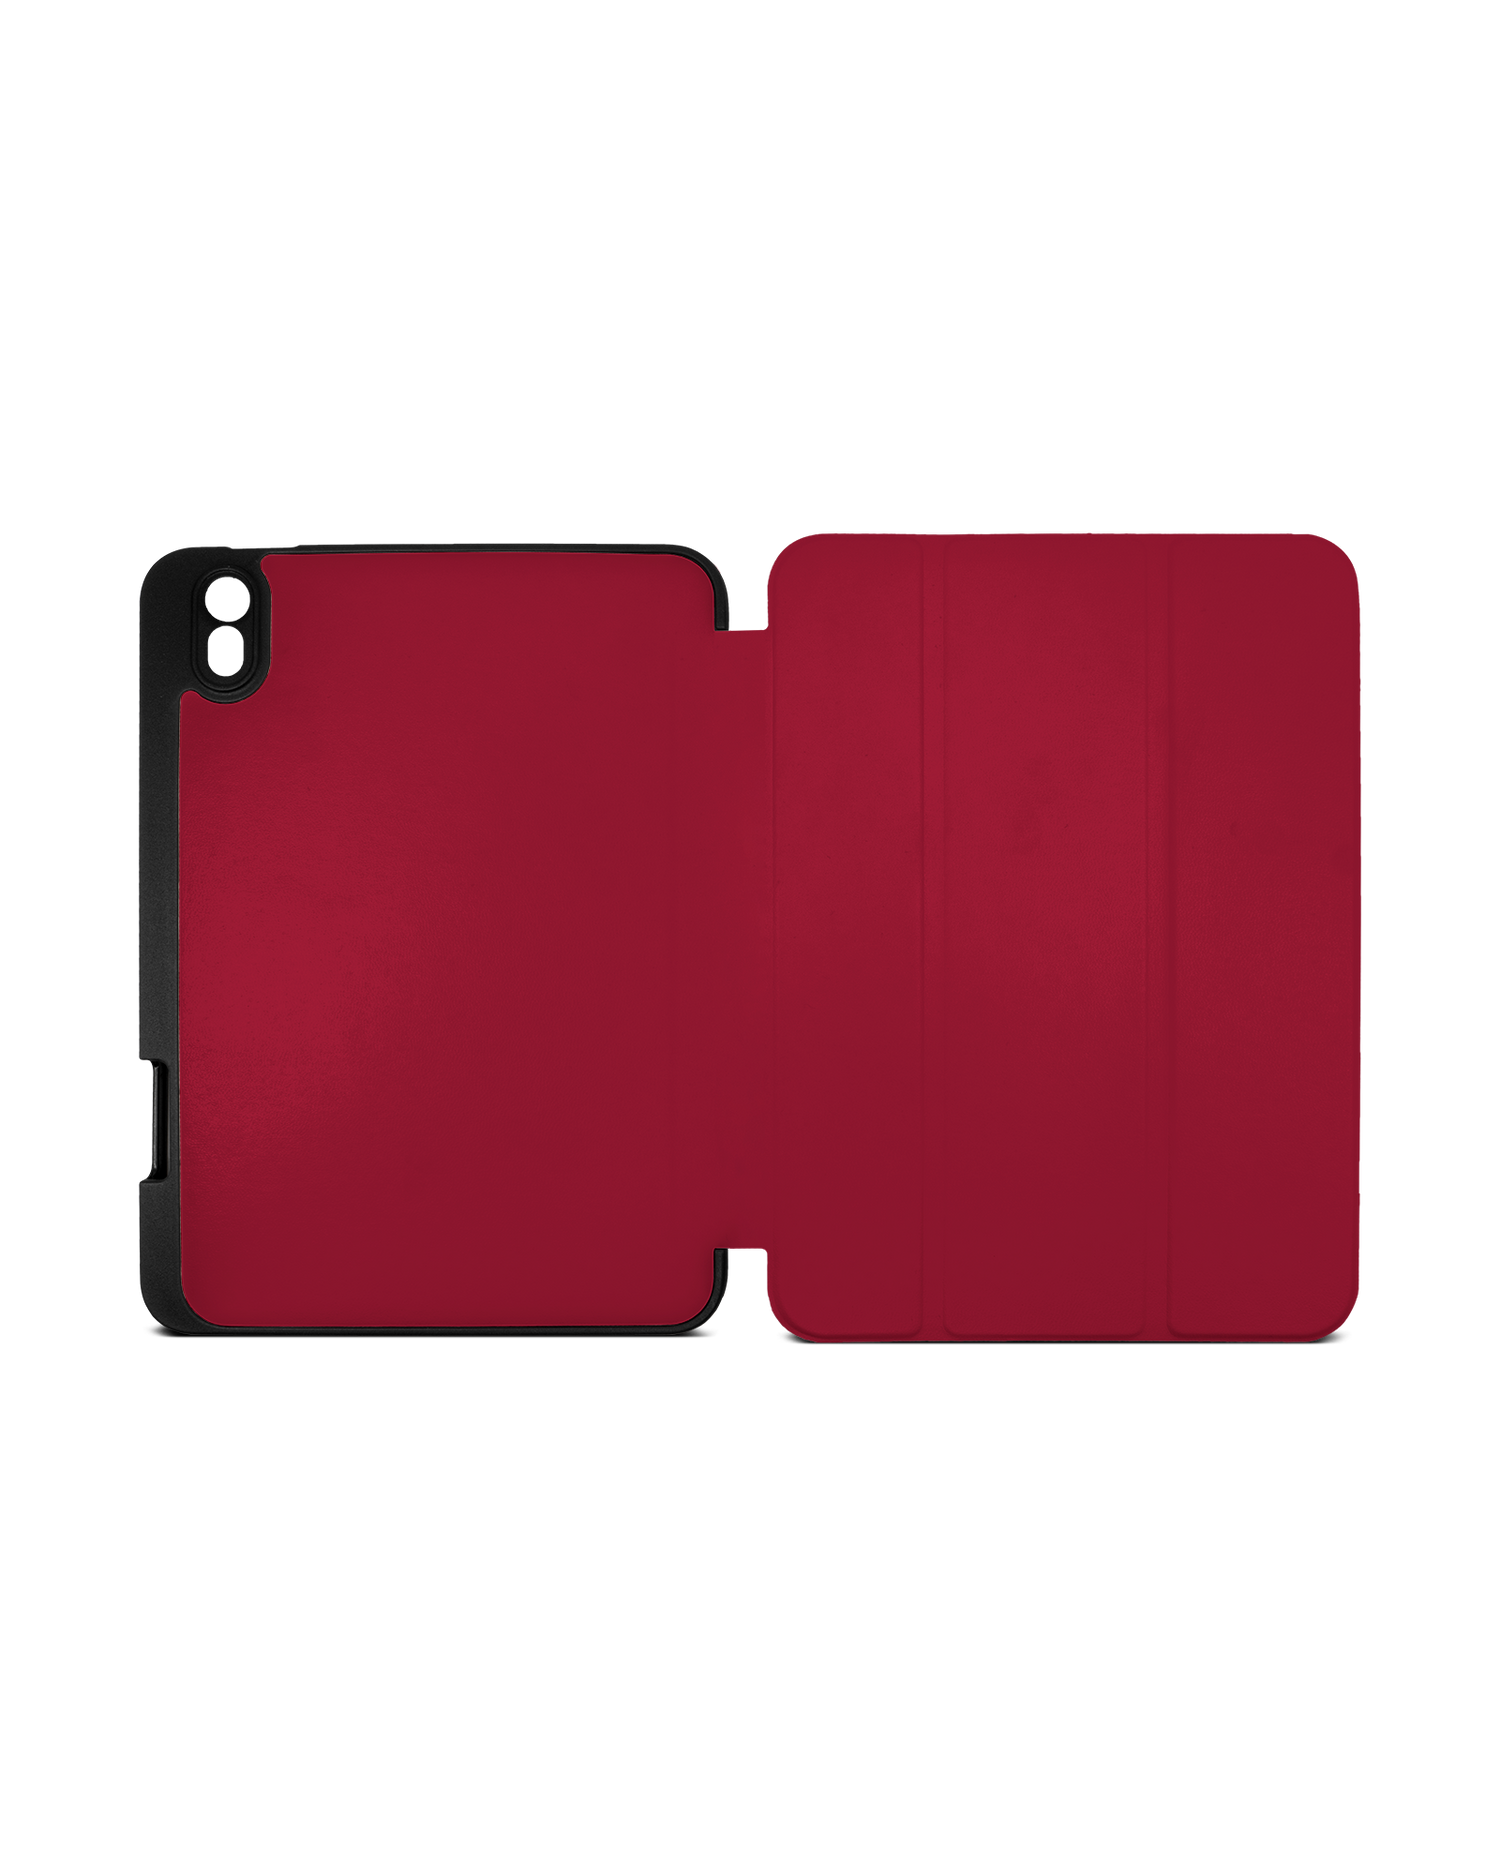 RED iPad Case with Pencil Holder Apple iPad mini 6 (2021): Opened exterior view